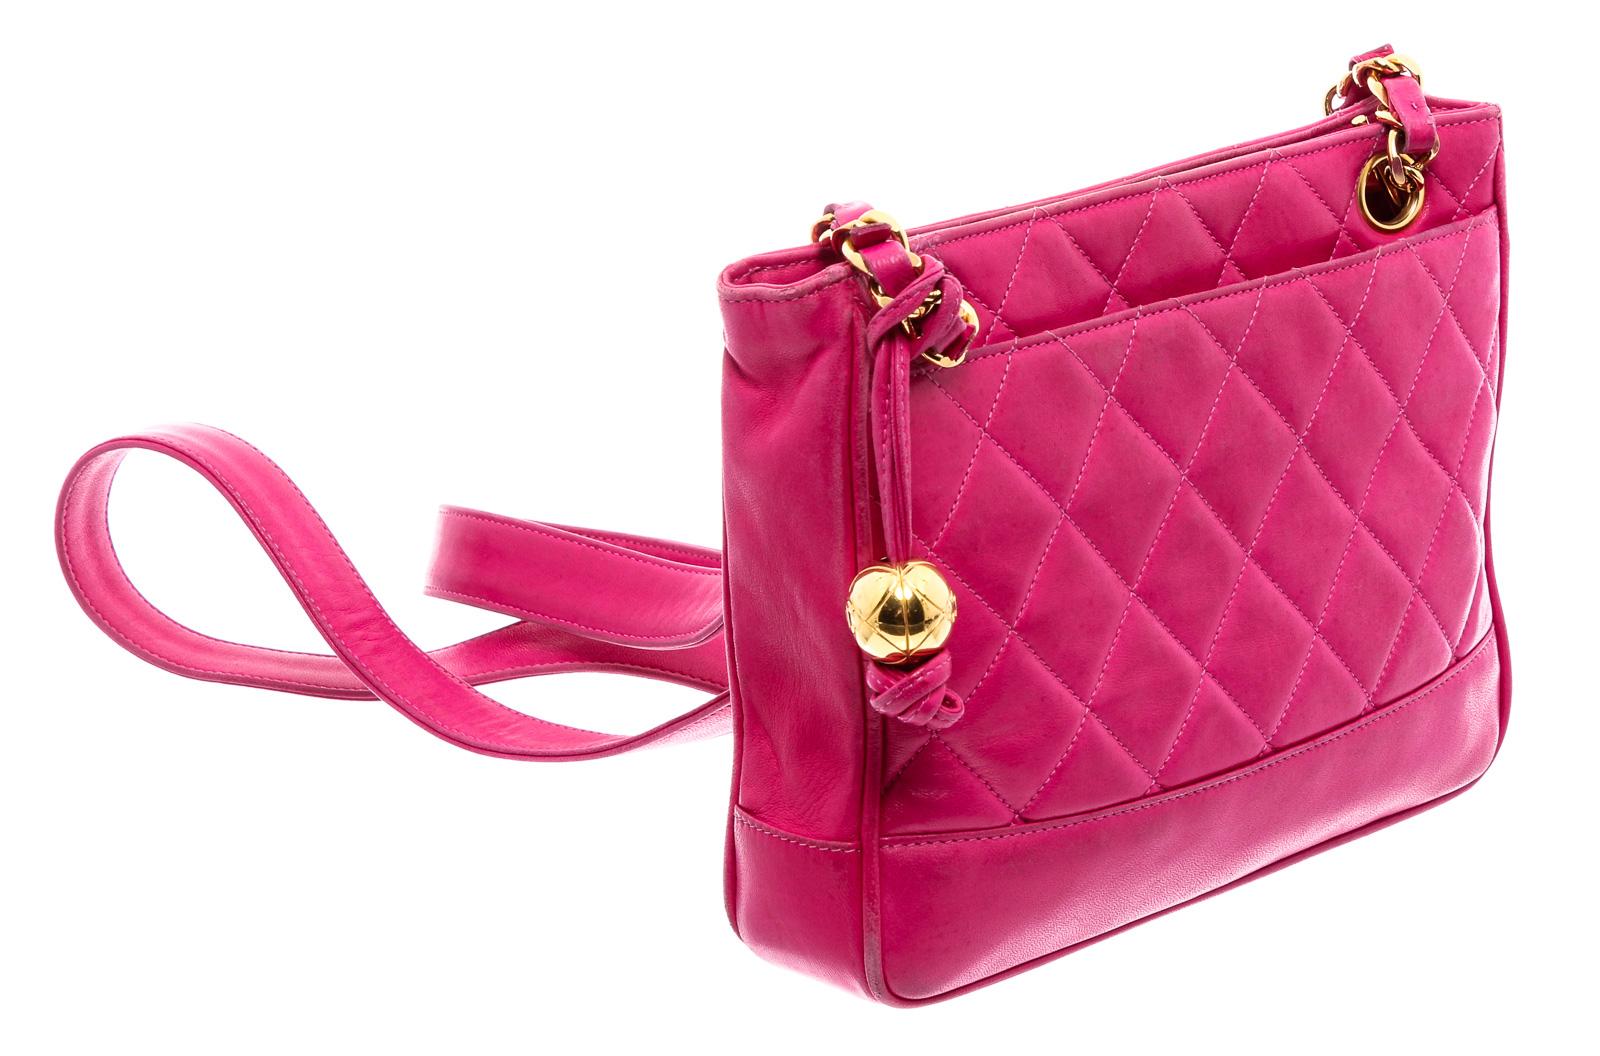 pink quilted leather handbag